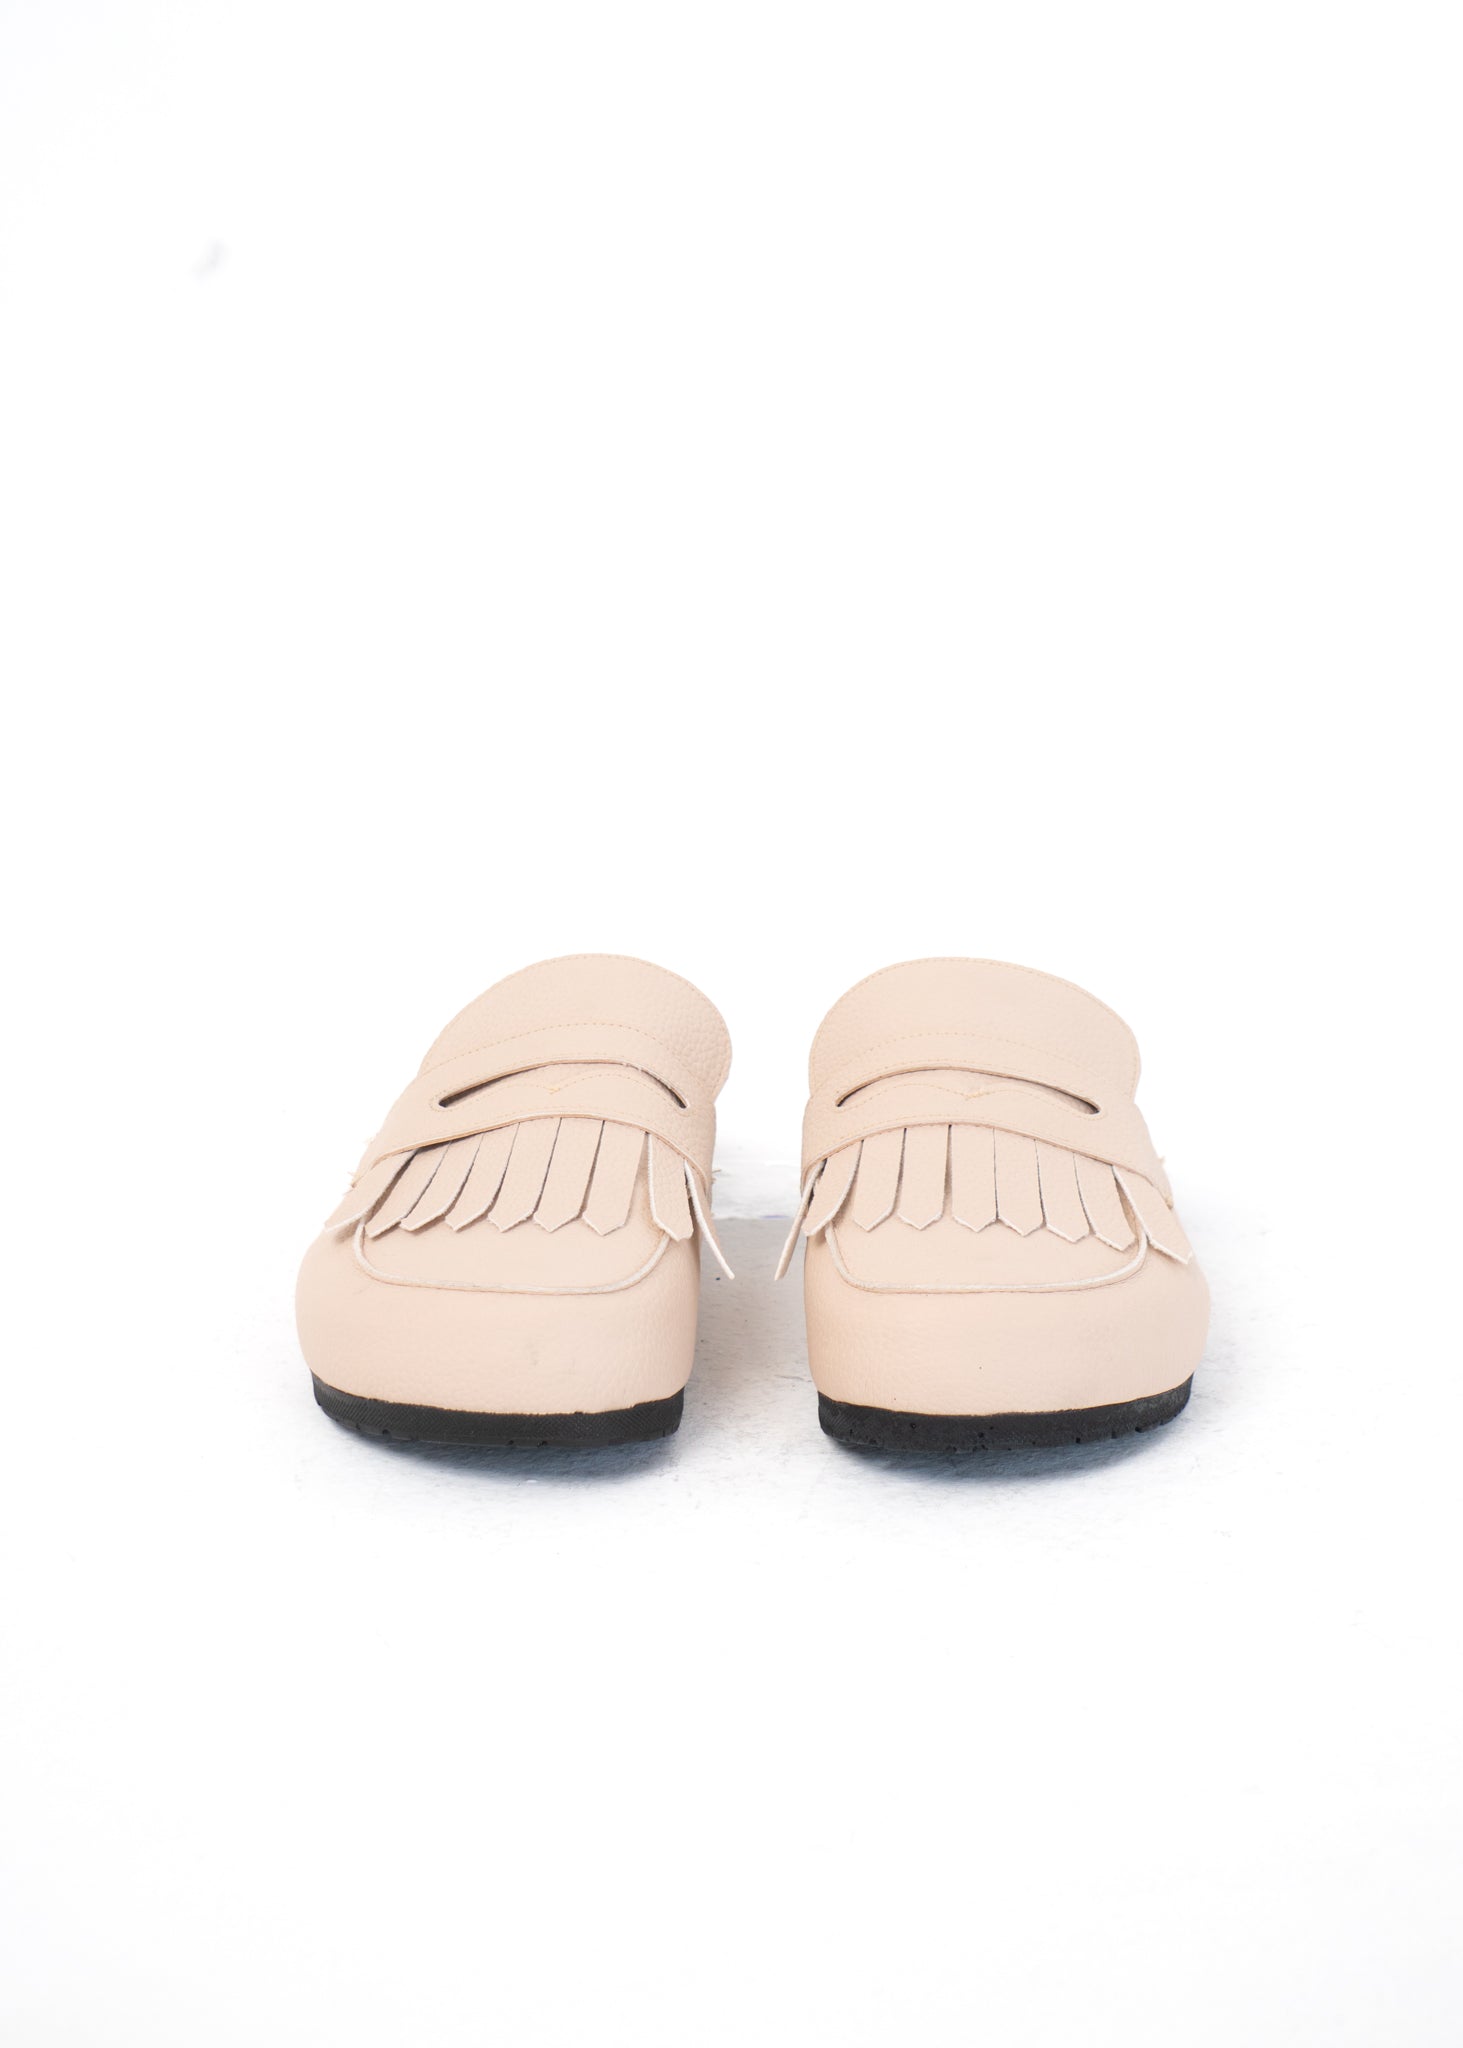 Loafer Clogs " Fringed " - Coffe Latte